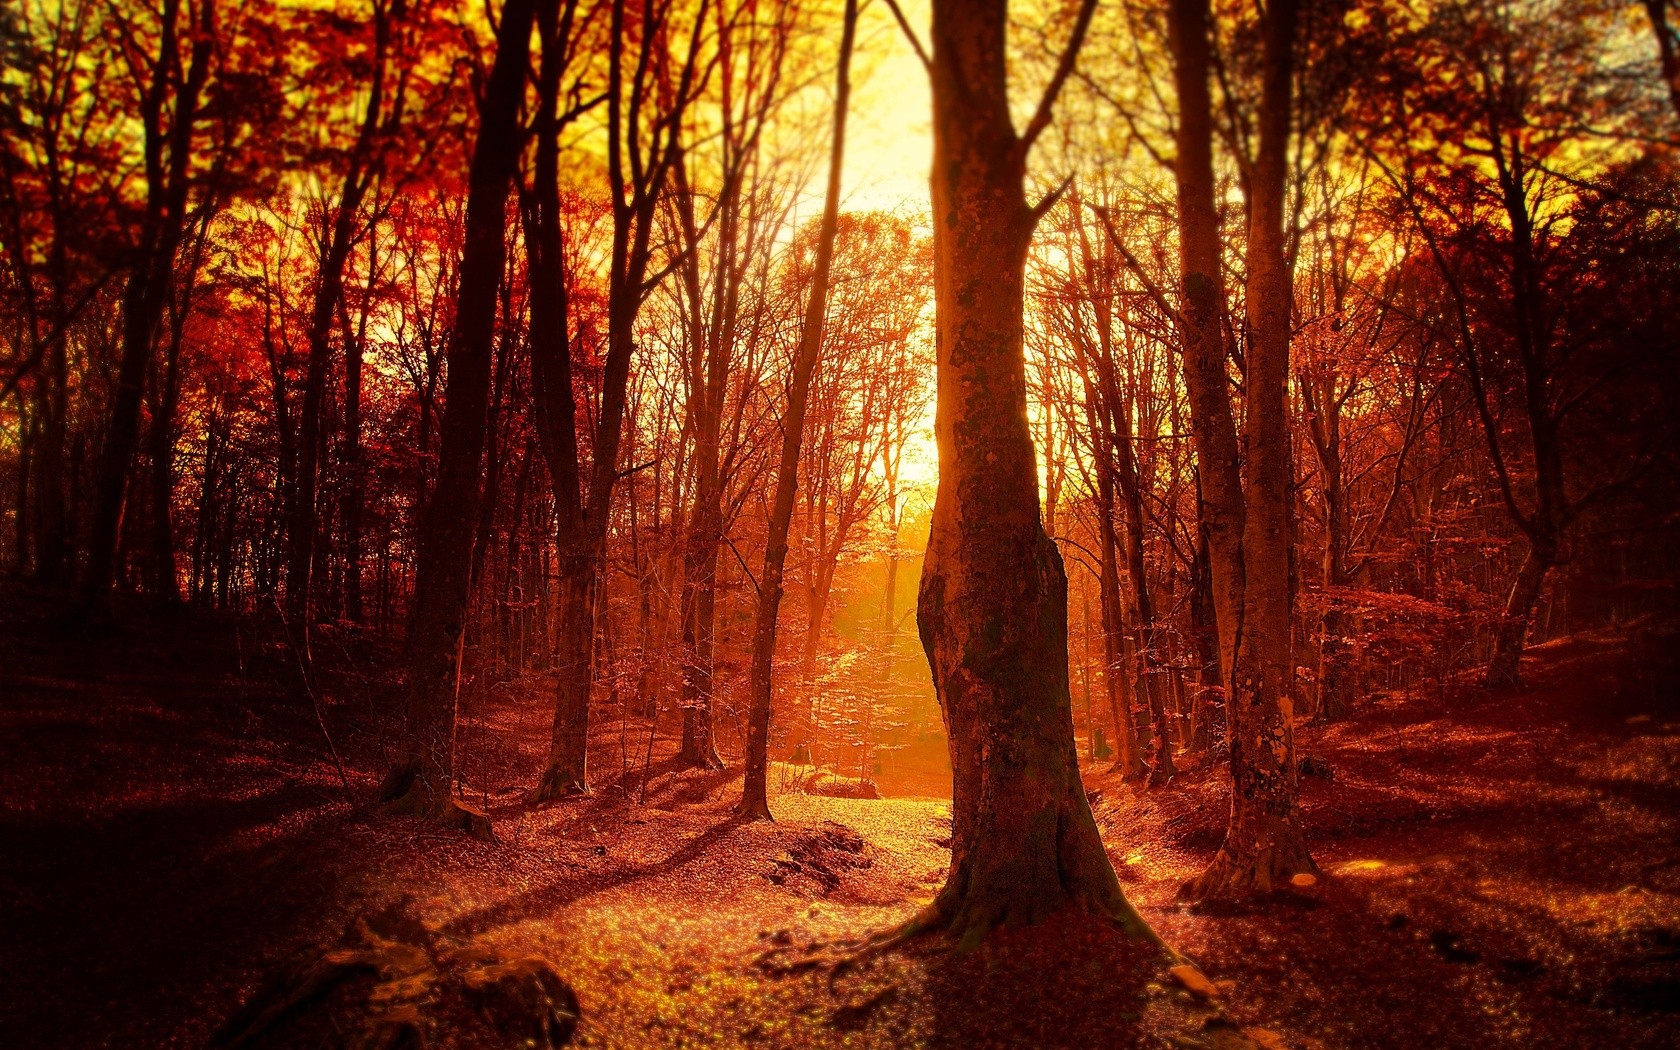 General 1680x1050 fall sunset forest trees sunlight nature outdoors